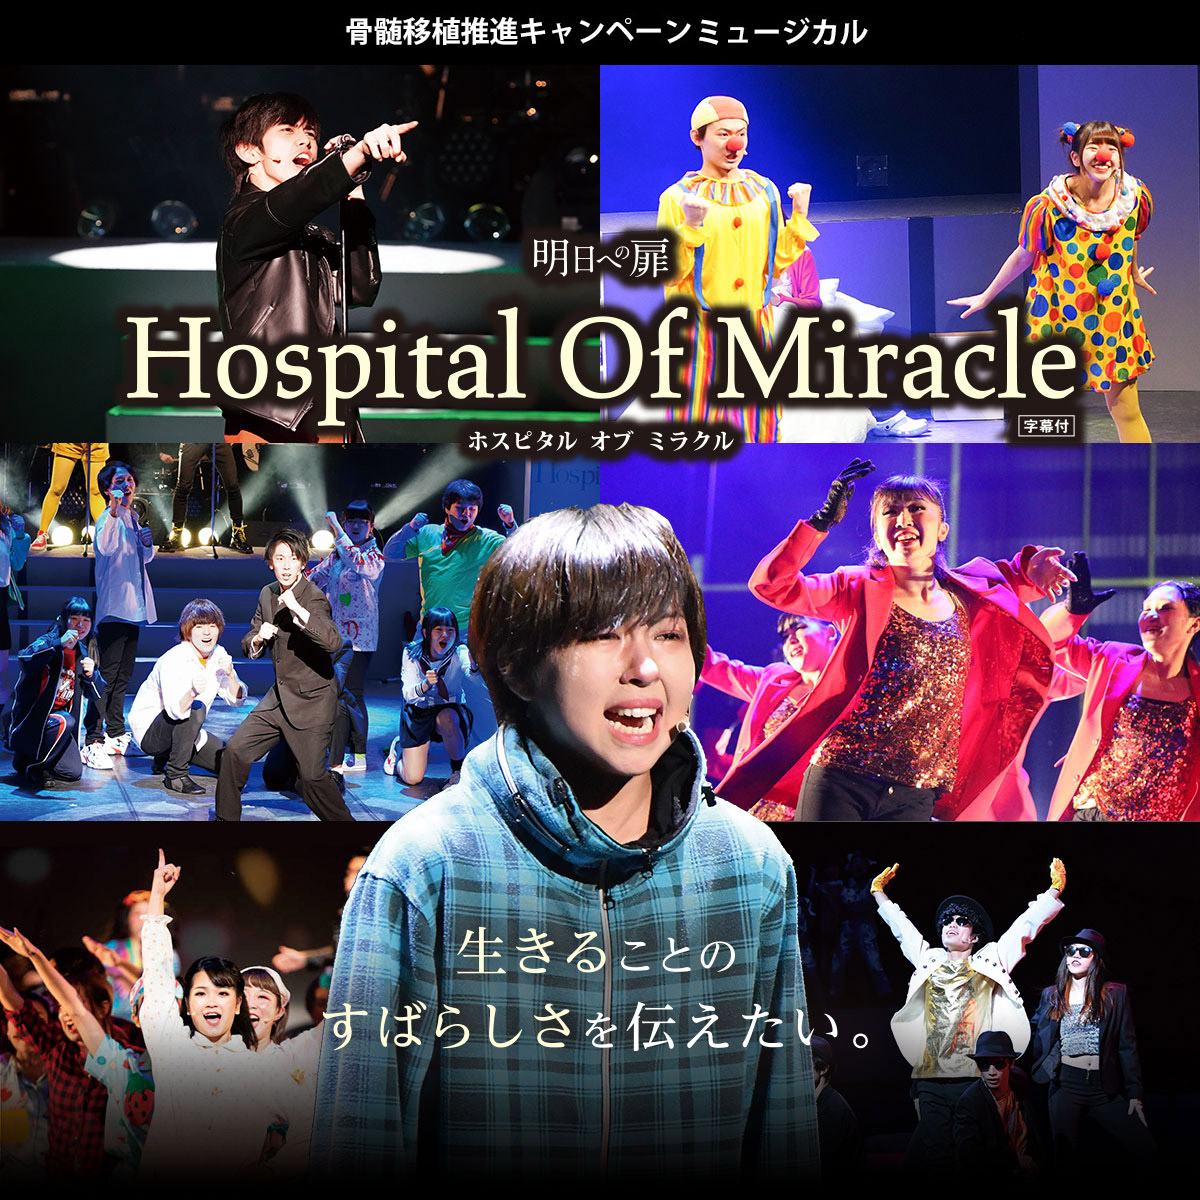 Hospital Of Miracle